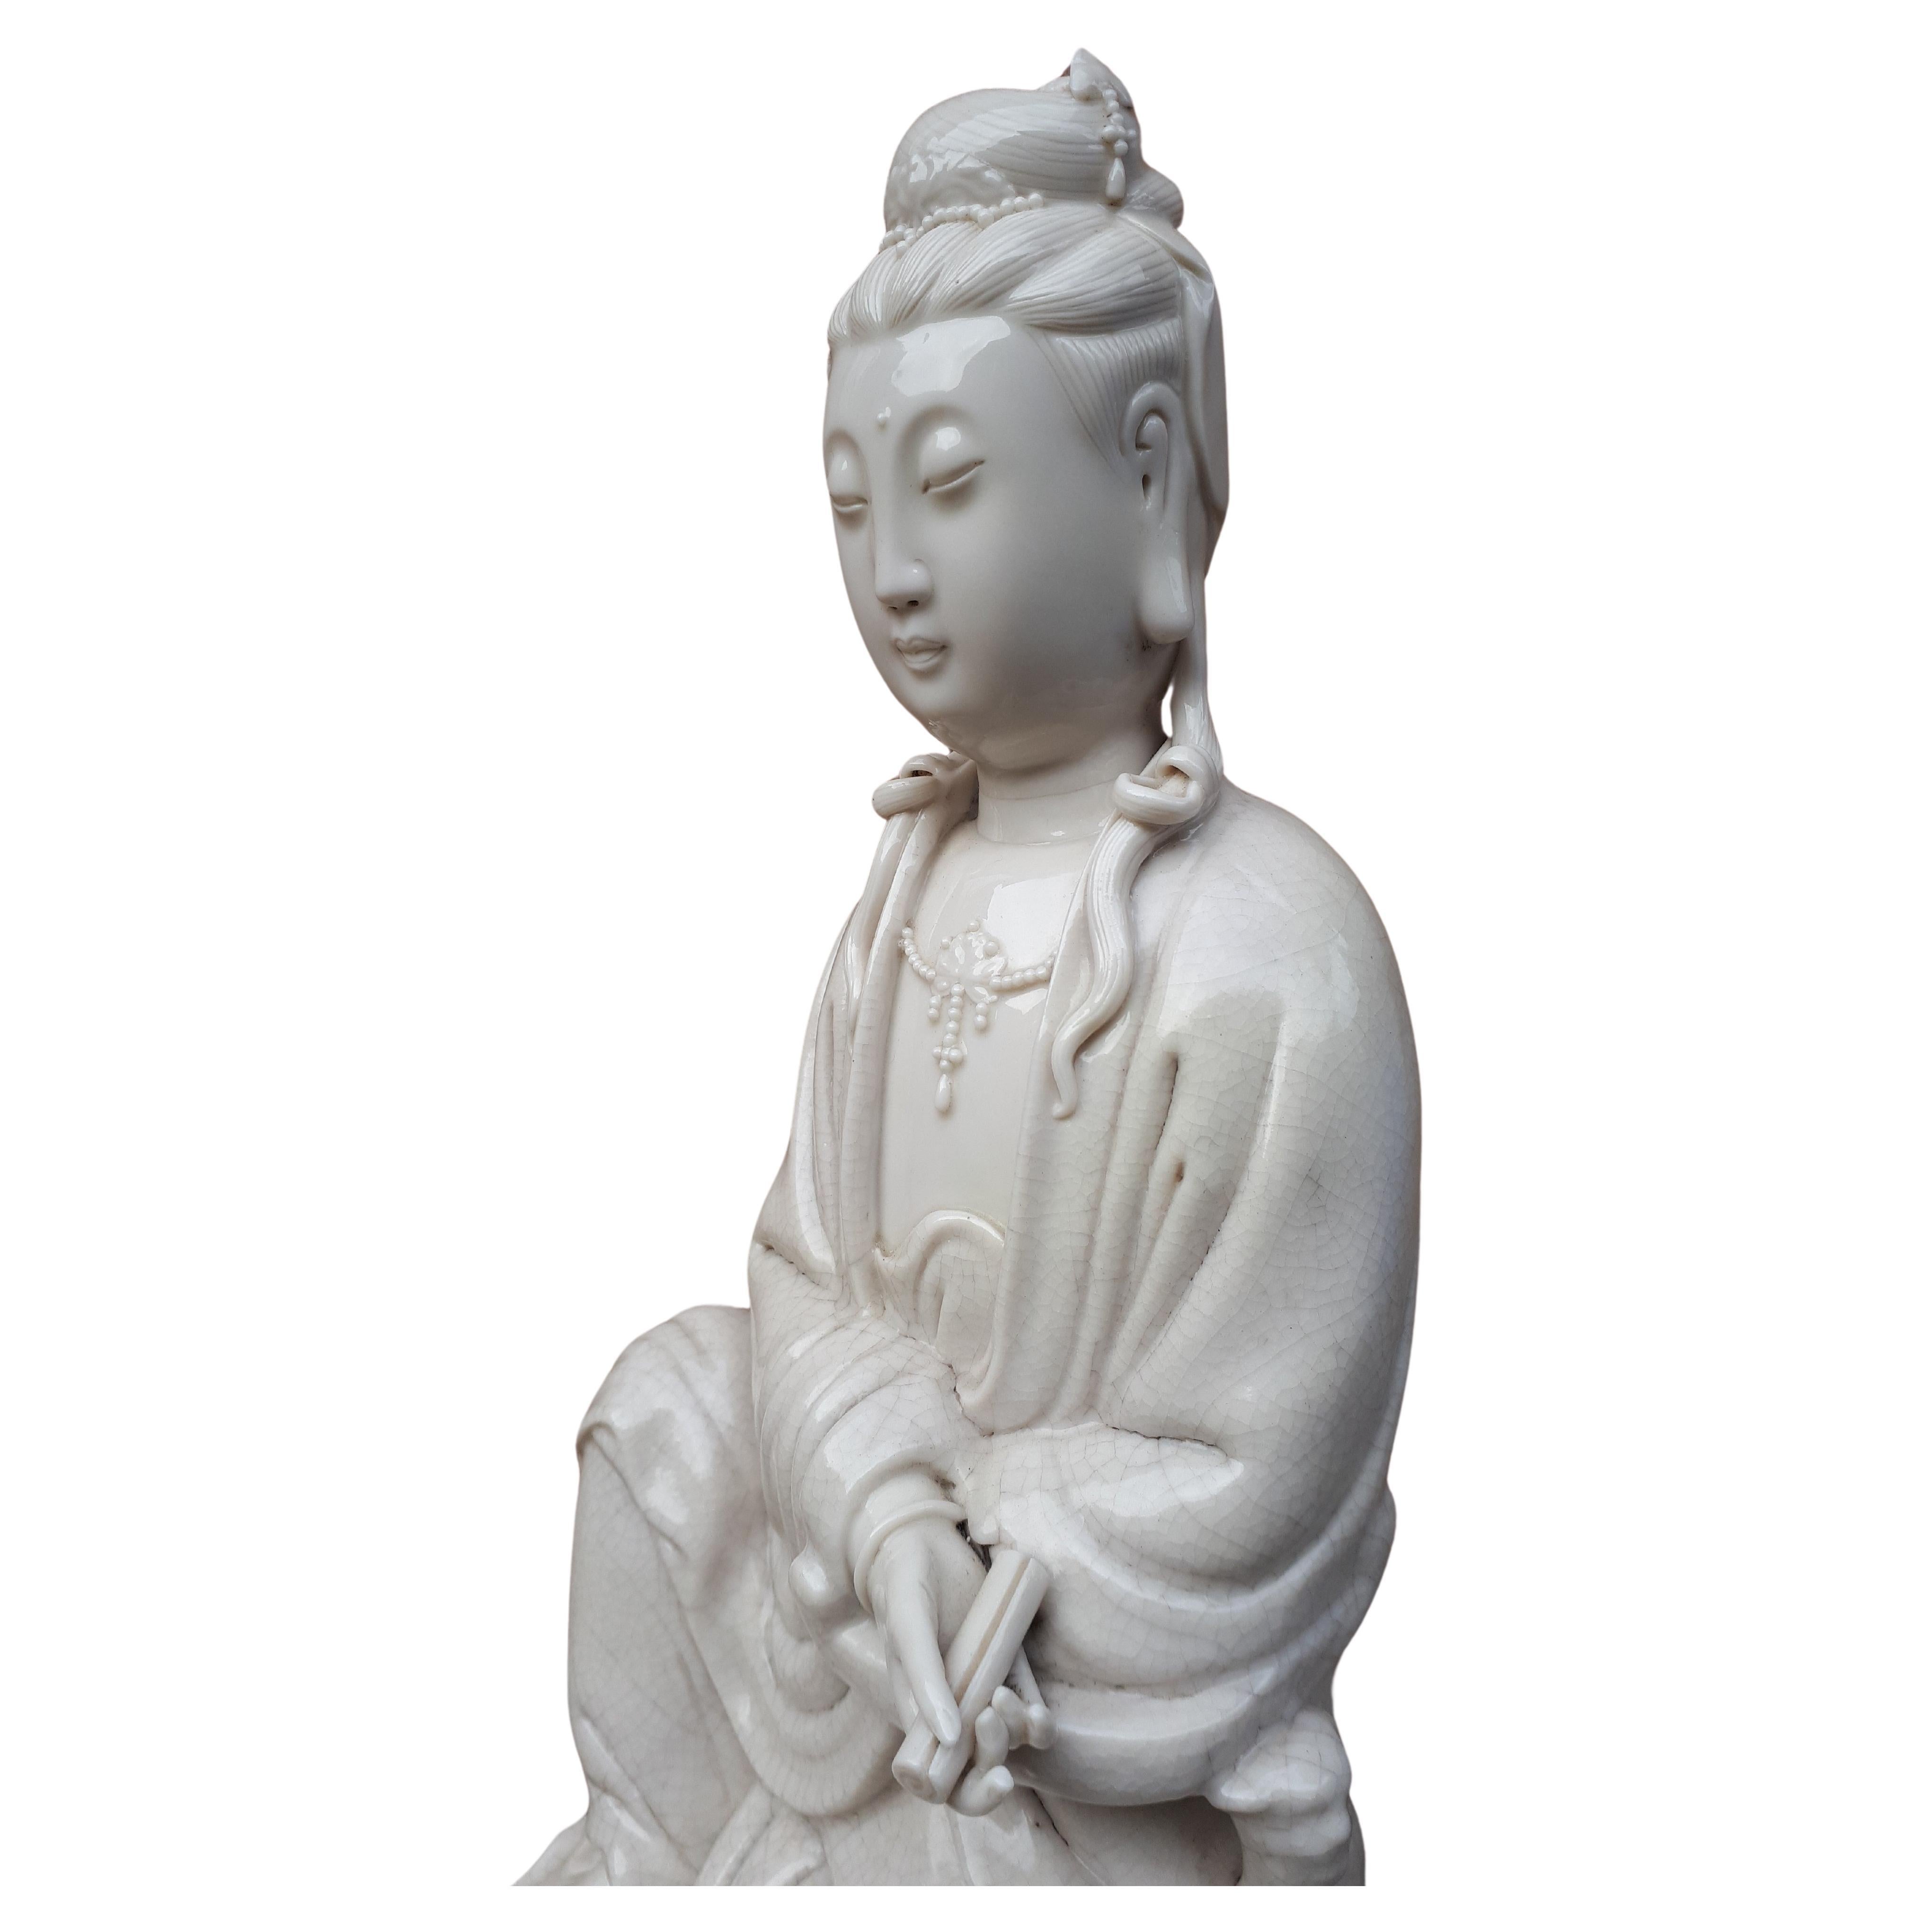 A Blanc de Chine sculpture of Guanyin, Qing Dynasty